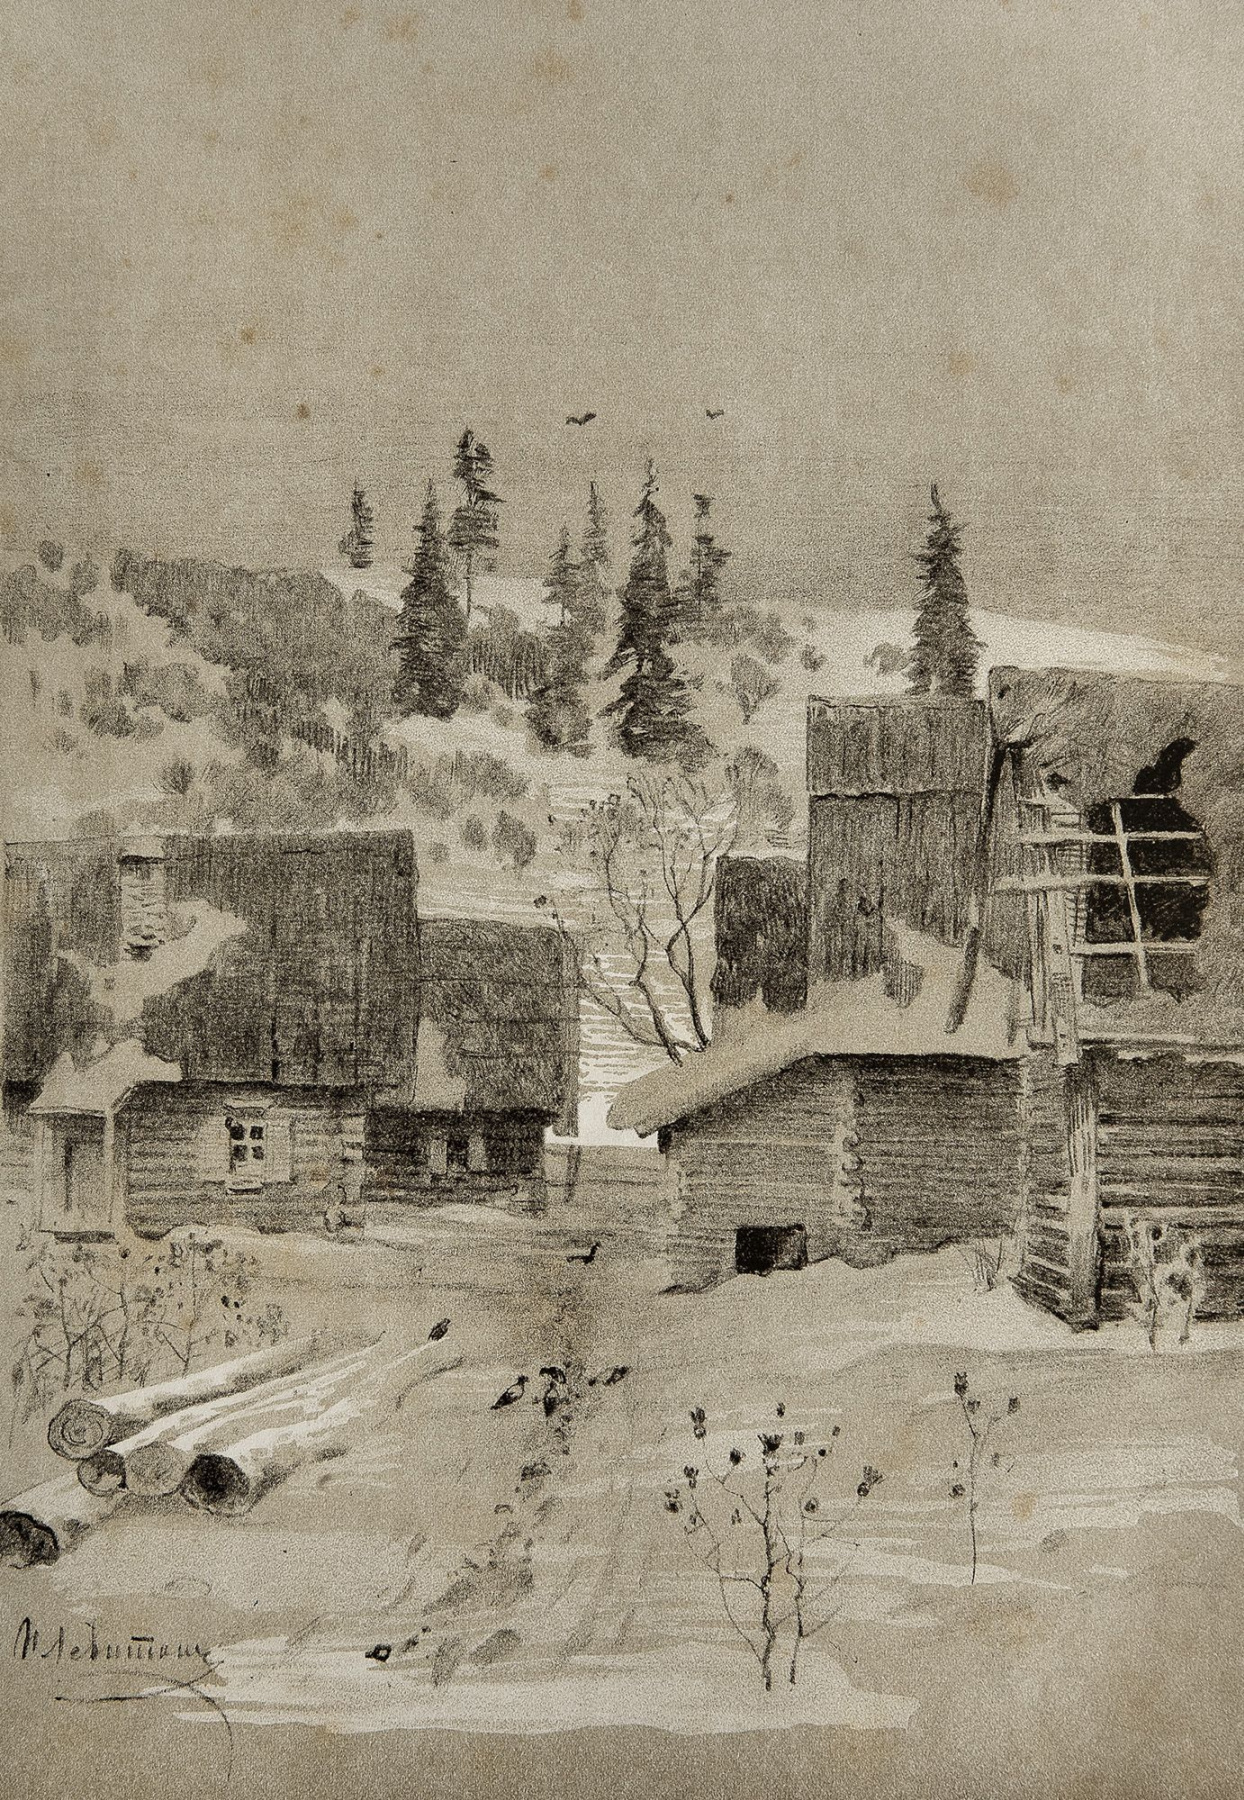 Isaac Levitan. The village. Lithograph in the journal "Russia" (Moscow, 1884). Art Annex to No. 40 (illustration to N. P. Bocharov "near Moscow Switzerland" in № 28)